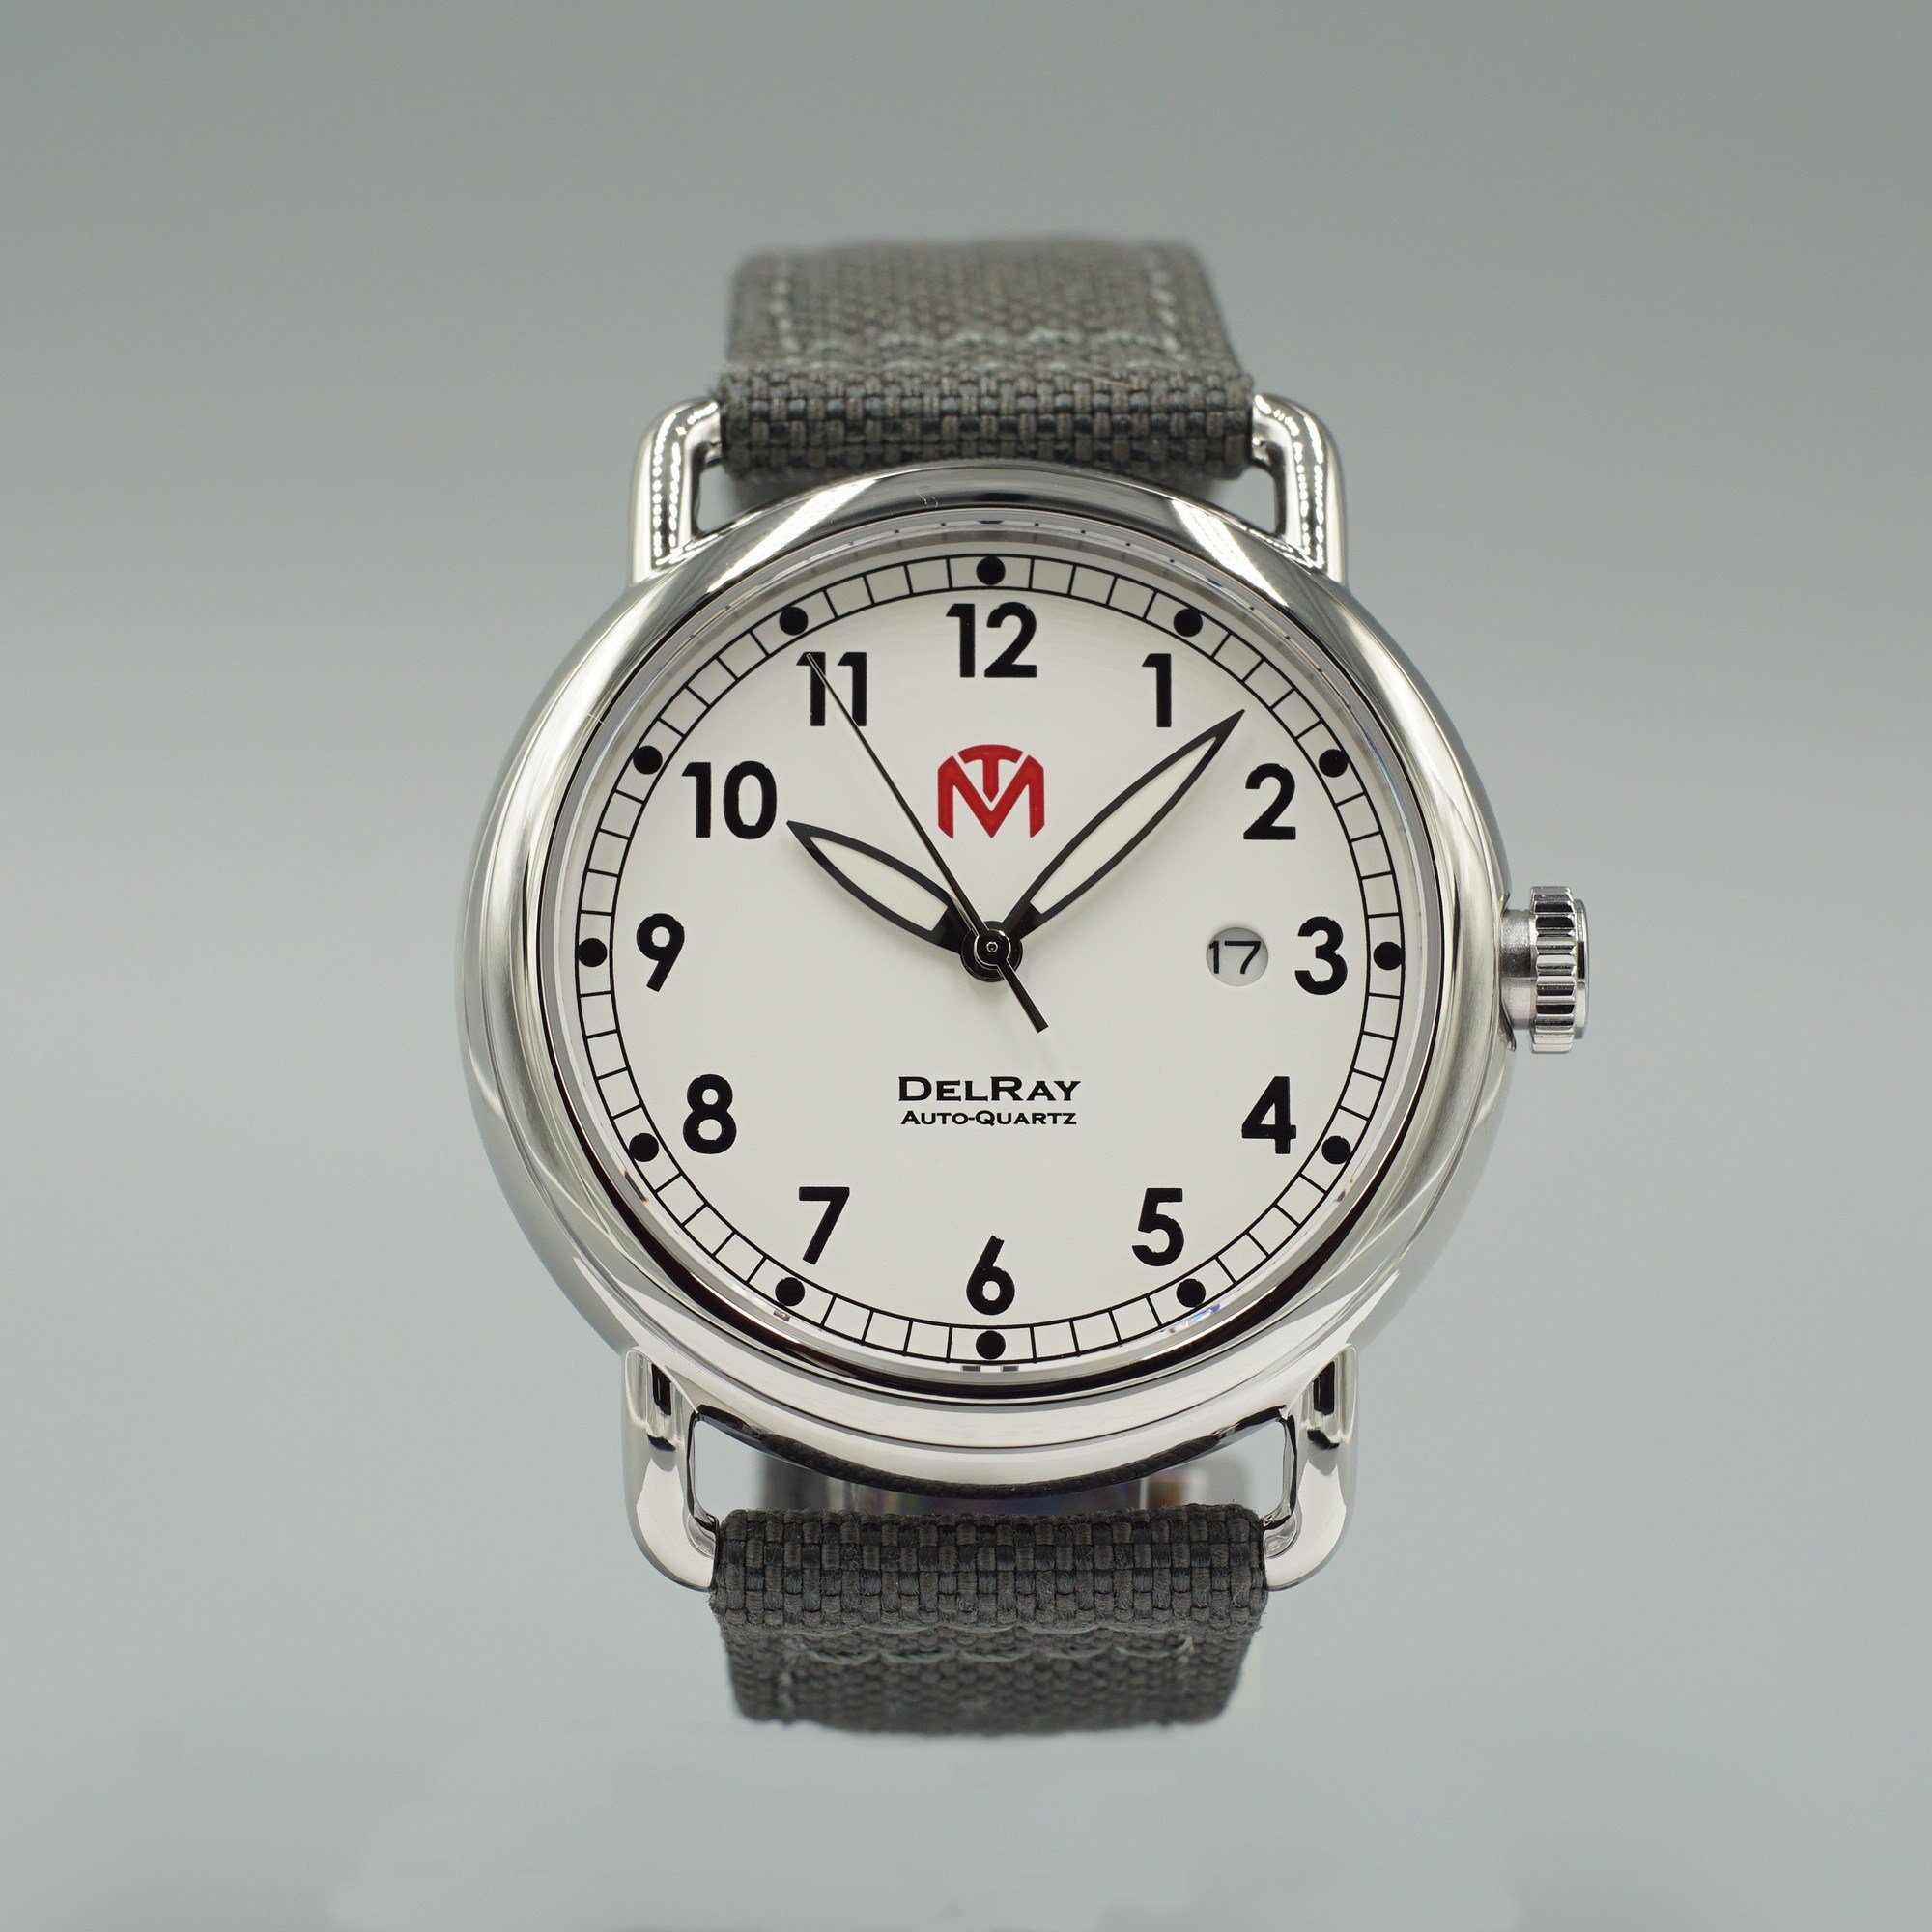 DelRay - White Dial - Polished Case - 44mm Wire Lug Watch